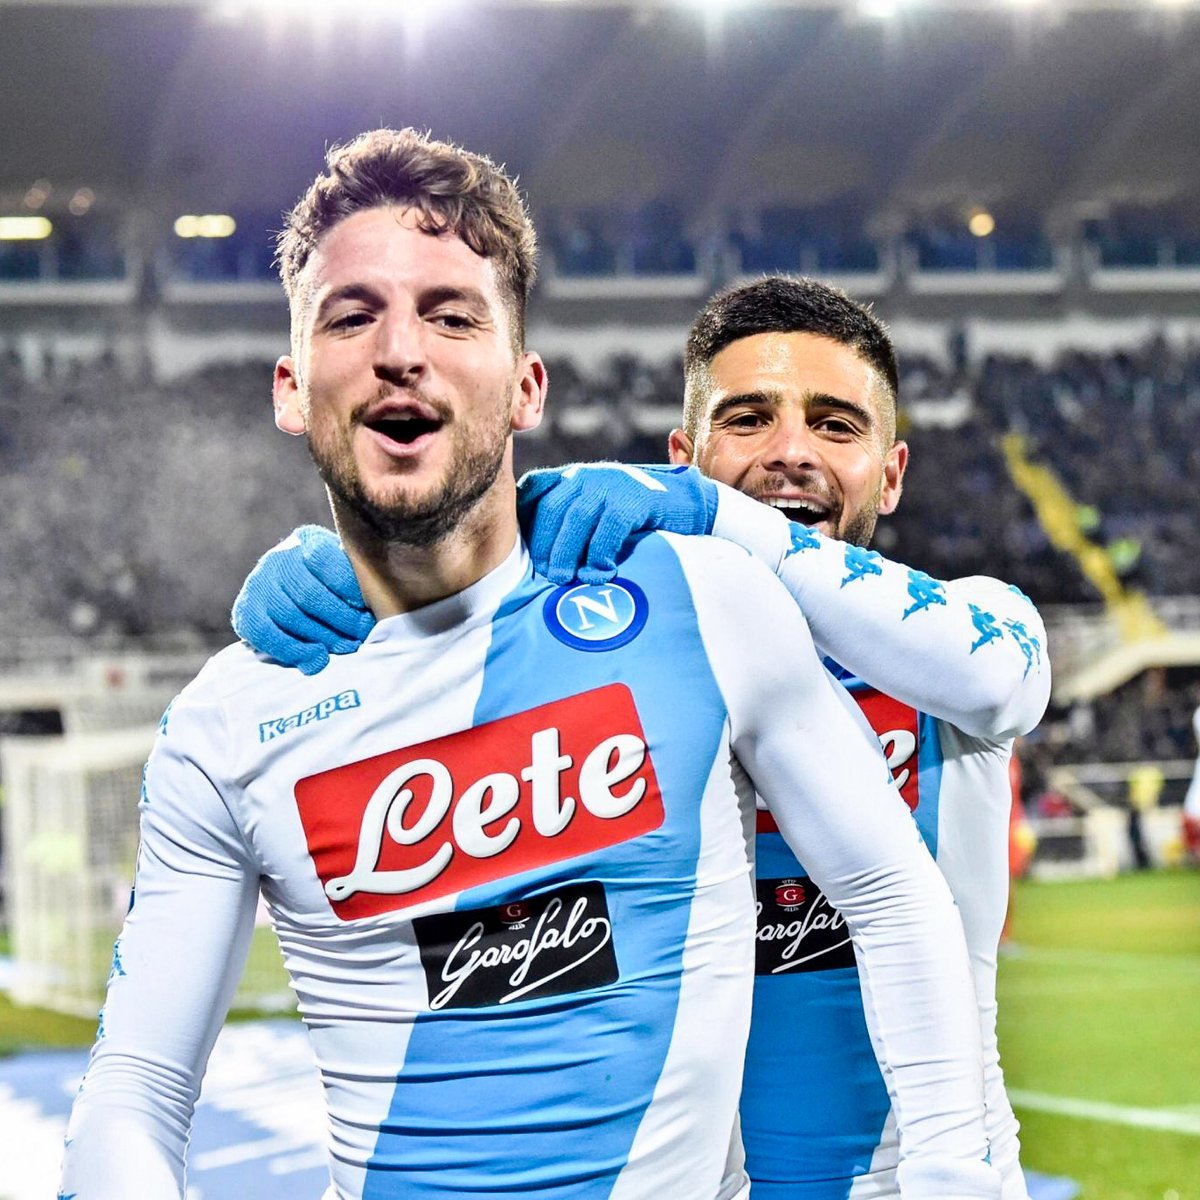 Front Office Sports on X: "It's believed that Napoli SSC produce their own kits next season, designed by Giorgio Armani himself. The Series A club's deal with current sponsor, Kappa, ends